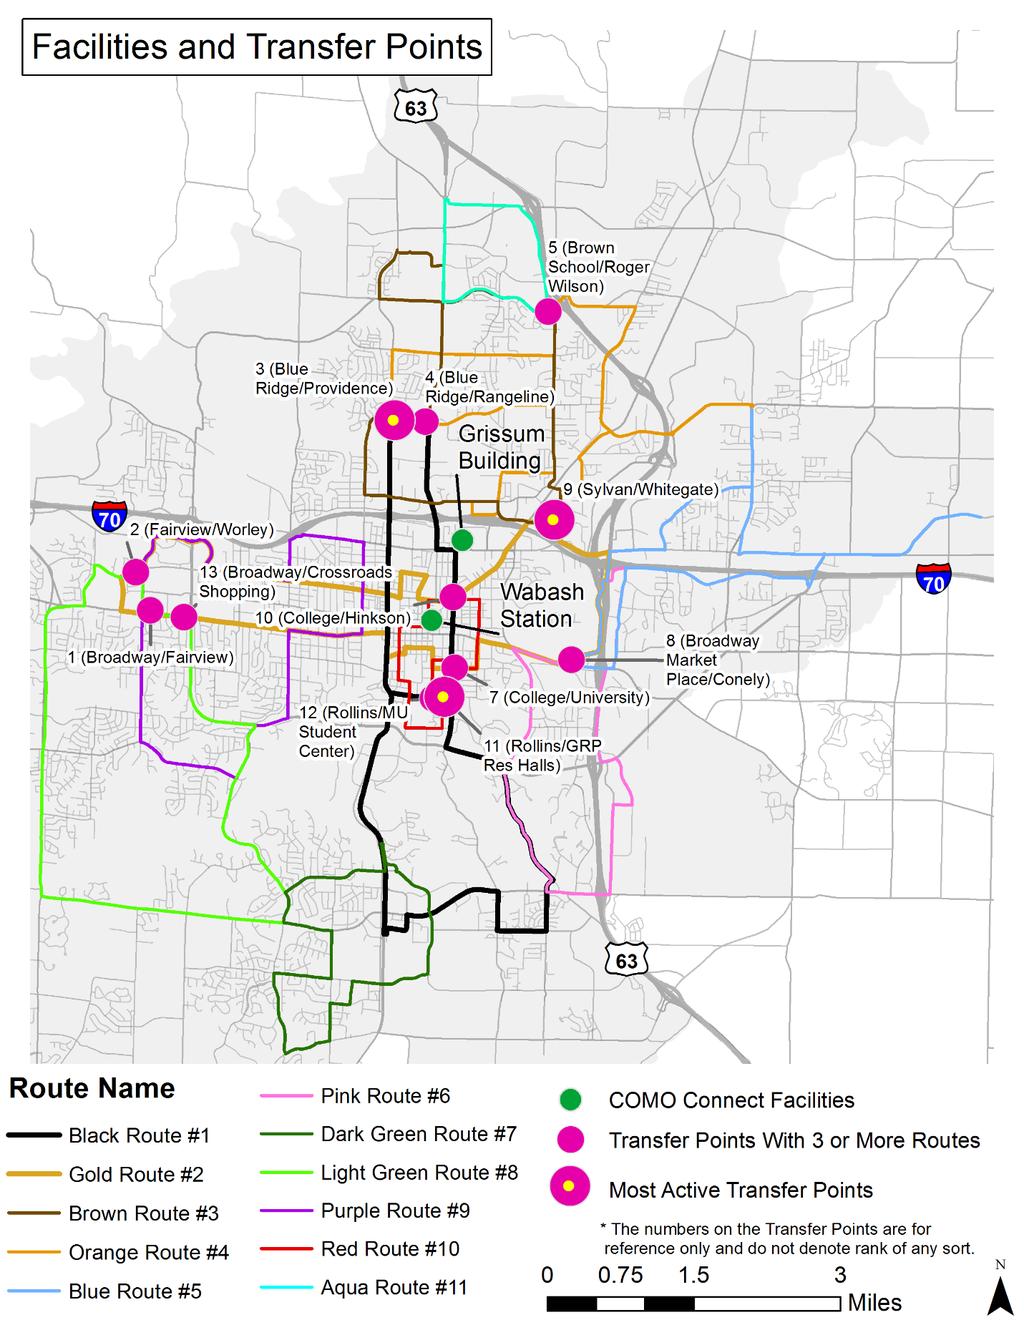 In Figure 10, the bus stops serving three or more routes and stops with higher levels of ridership are labeled.